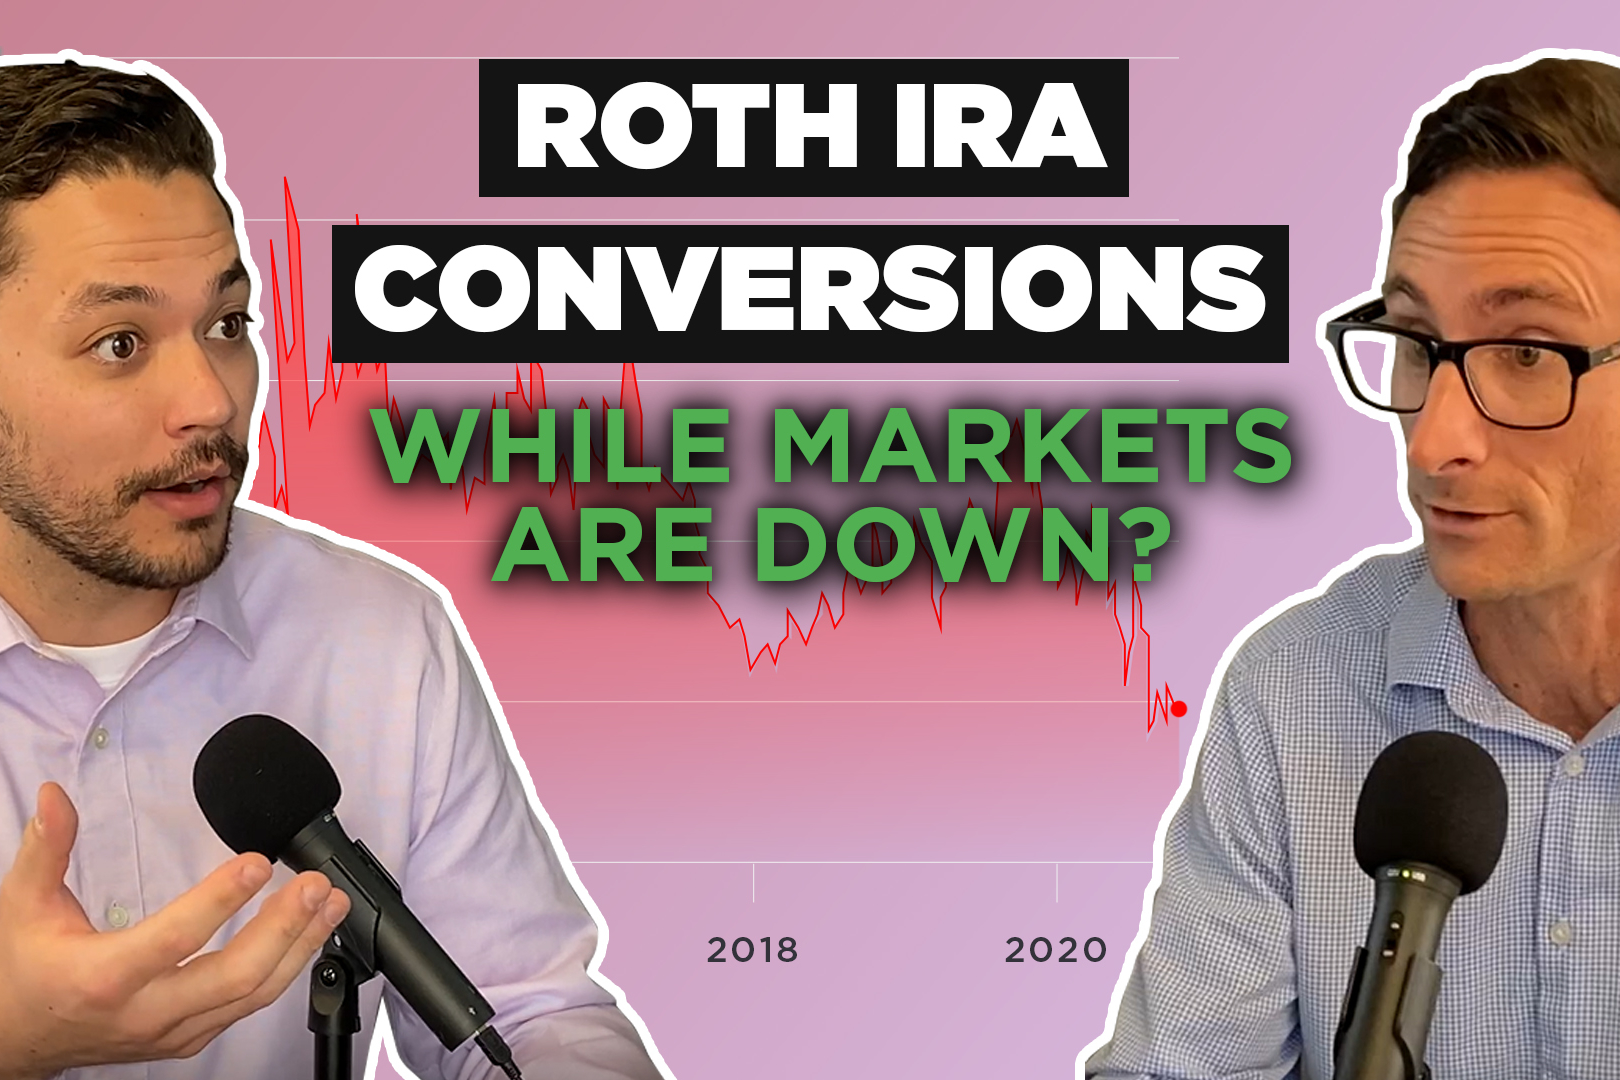 Reasons for a roth conversion 2022